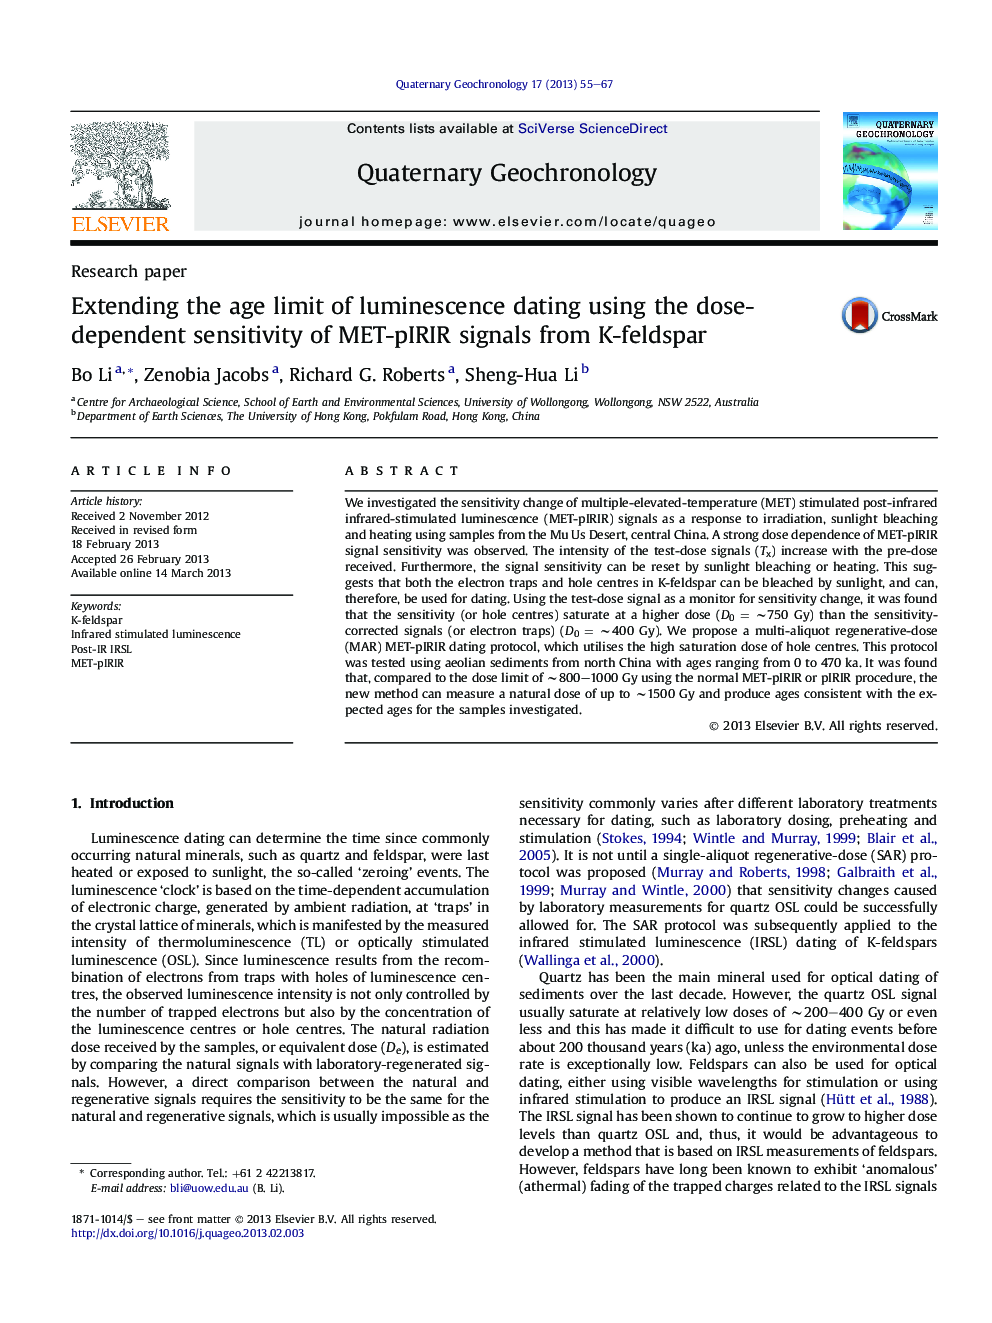 Extending the age limit of luminescence dating using the dose-dependent sensitivity of MET-pIRIR signals from K-feldspar